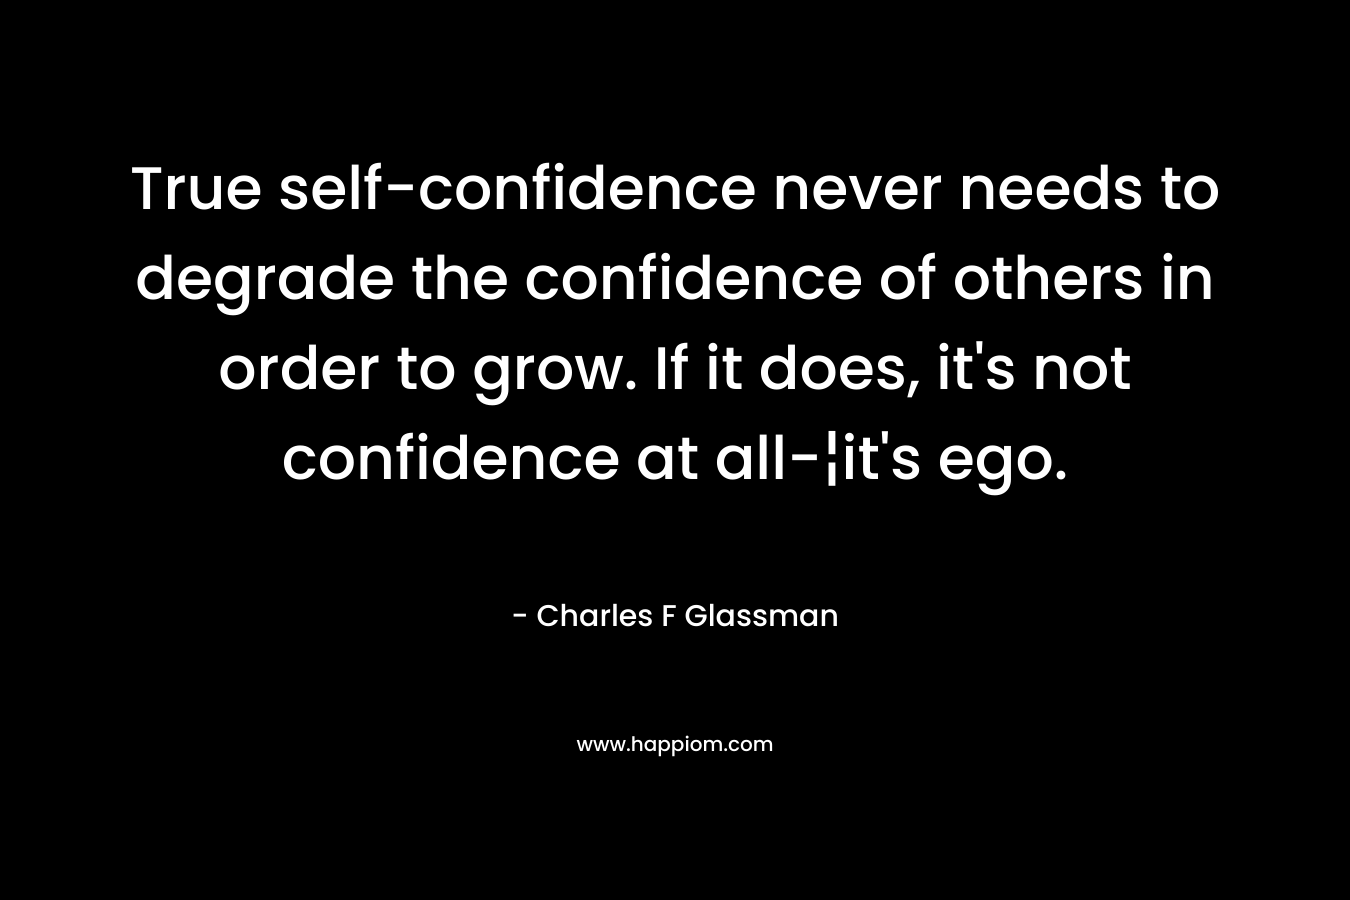 True self-confidence never needs to degrade the confidence of others in order to grow. If it does, it's not confidence at all-¦it's ego.